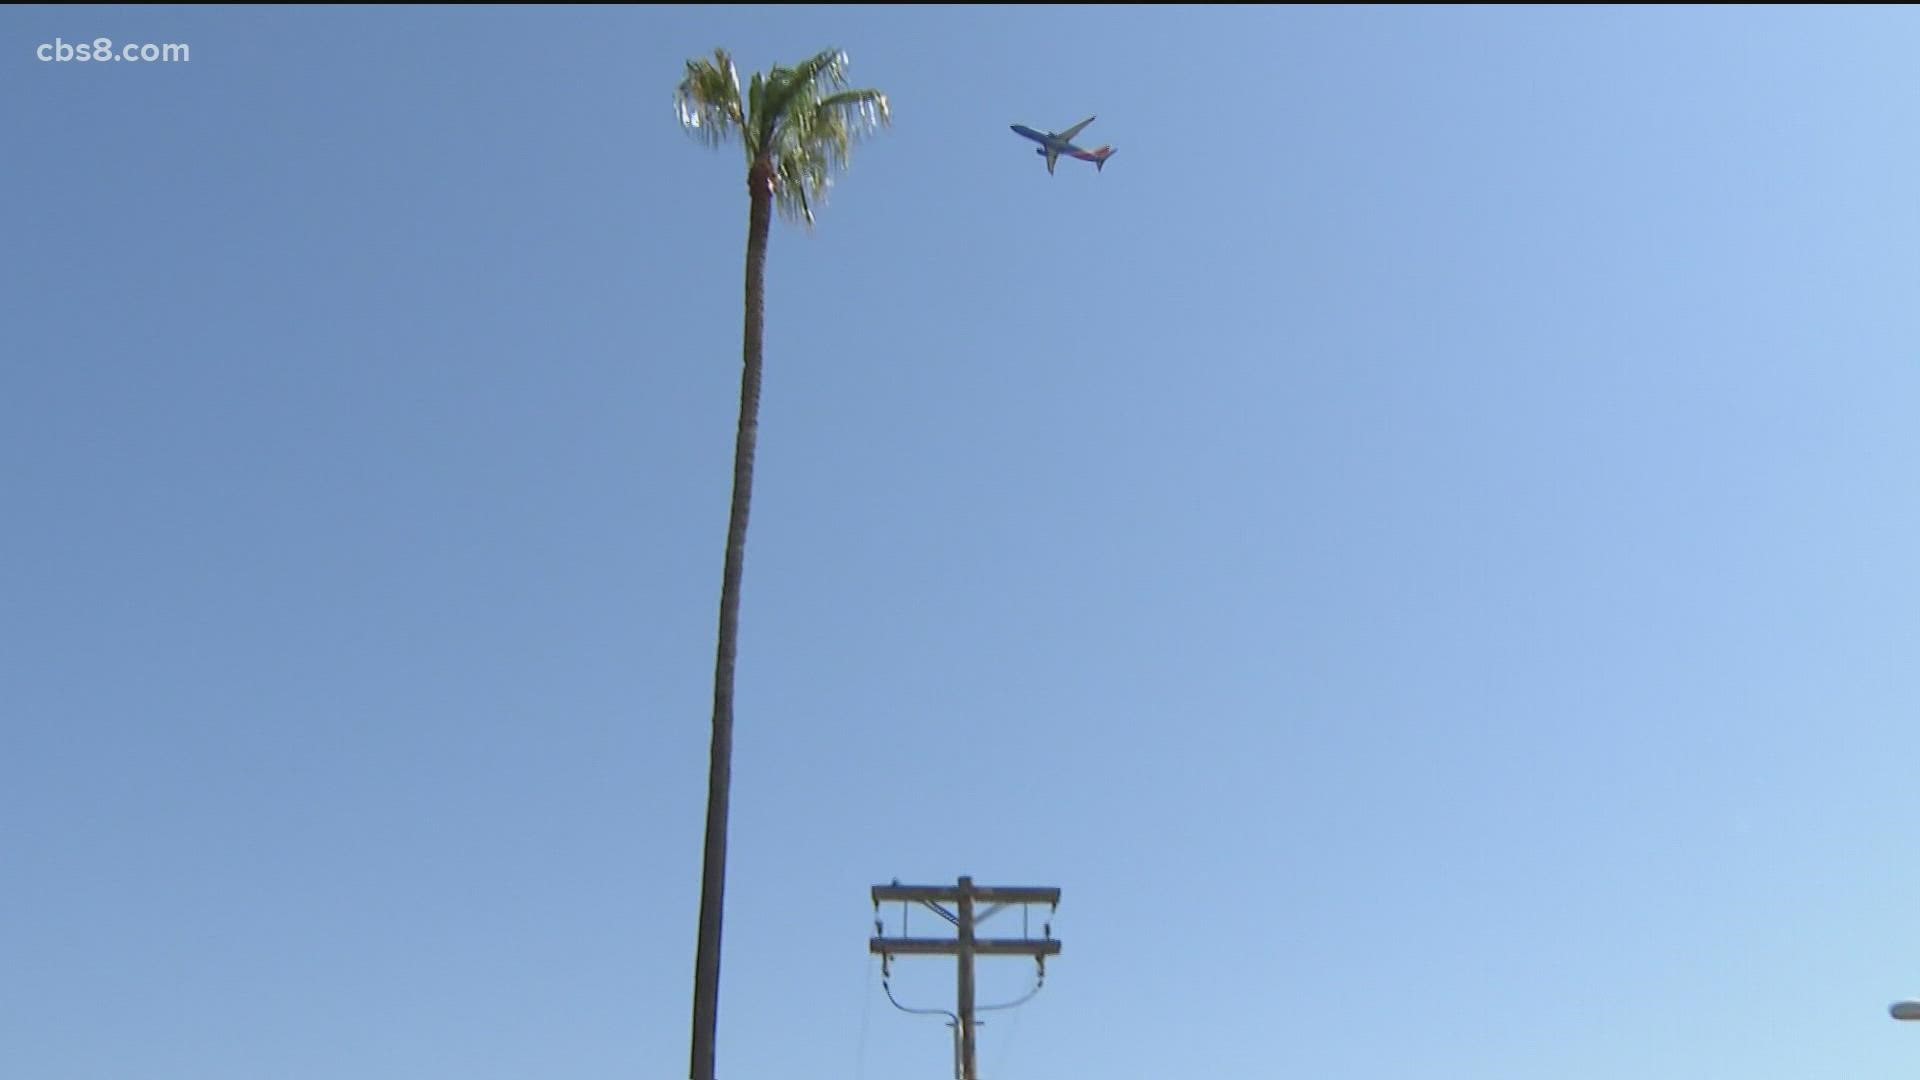 The city says they were ordered to remove the trees because they presented an urgent threat to flight paths and aviation. Some residents don't buy it.